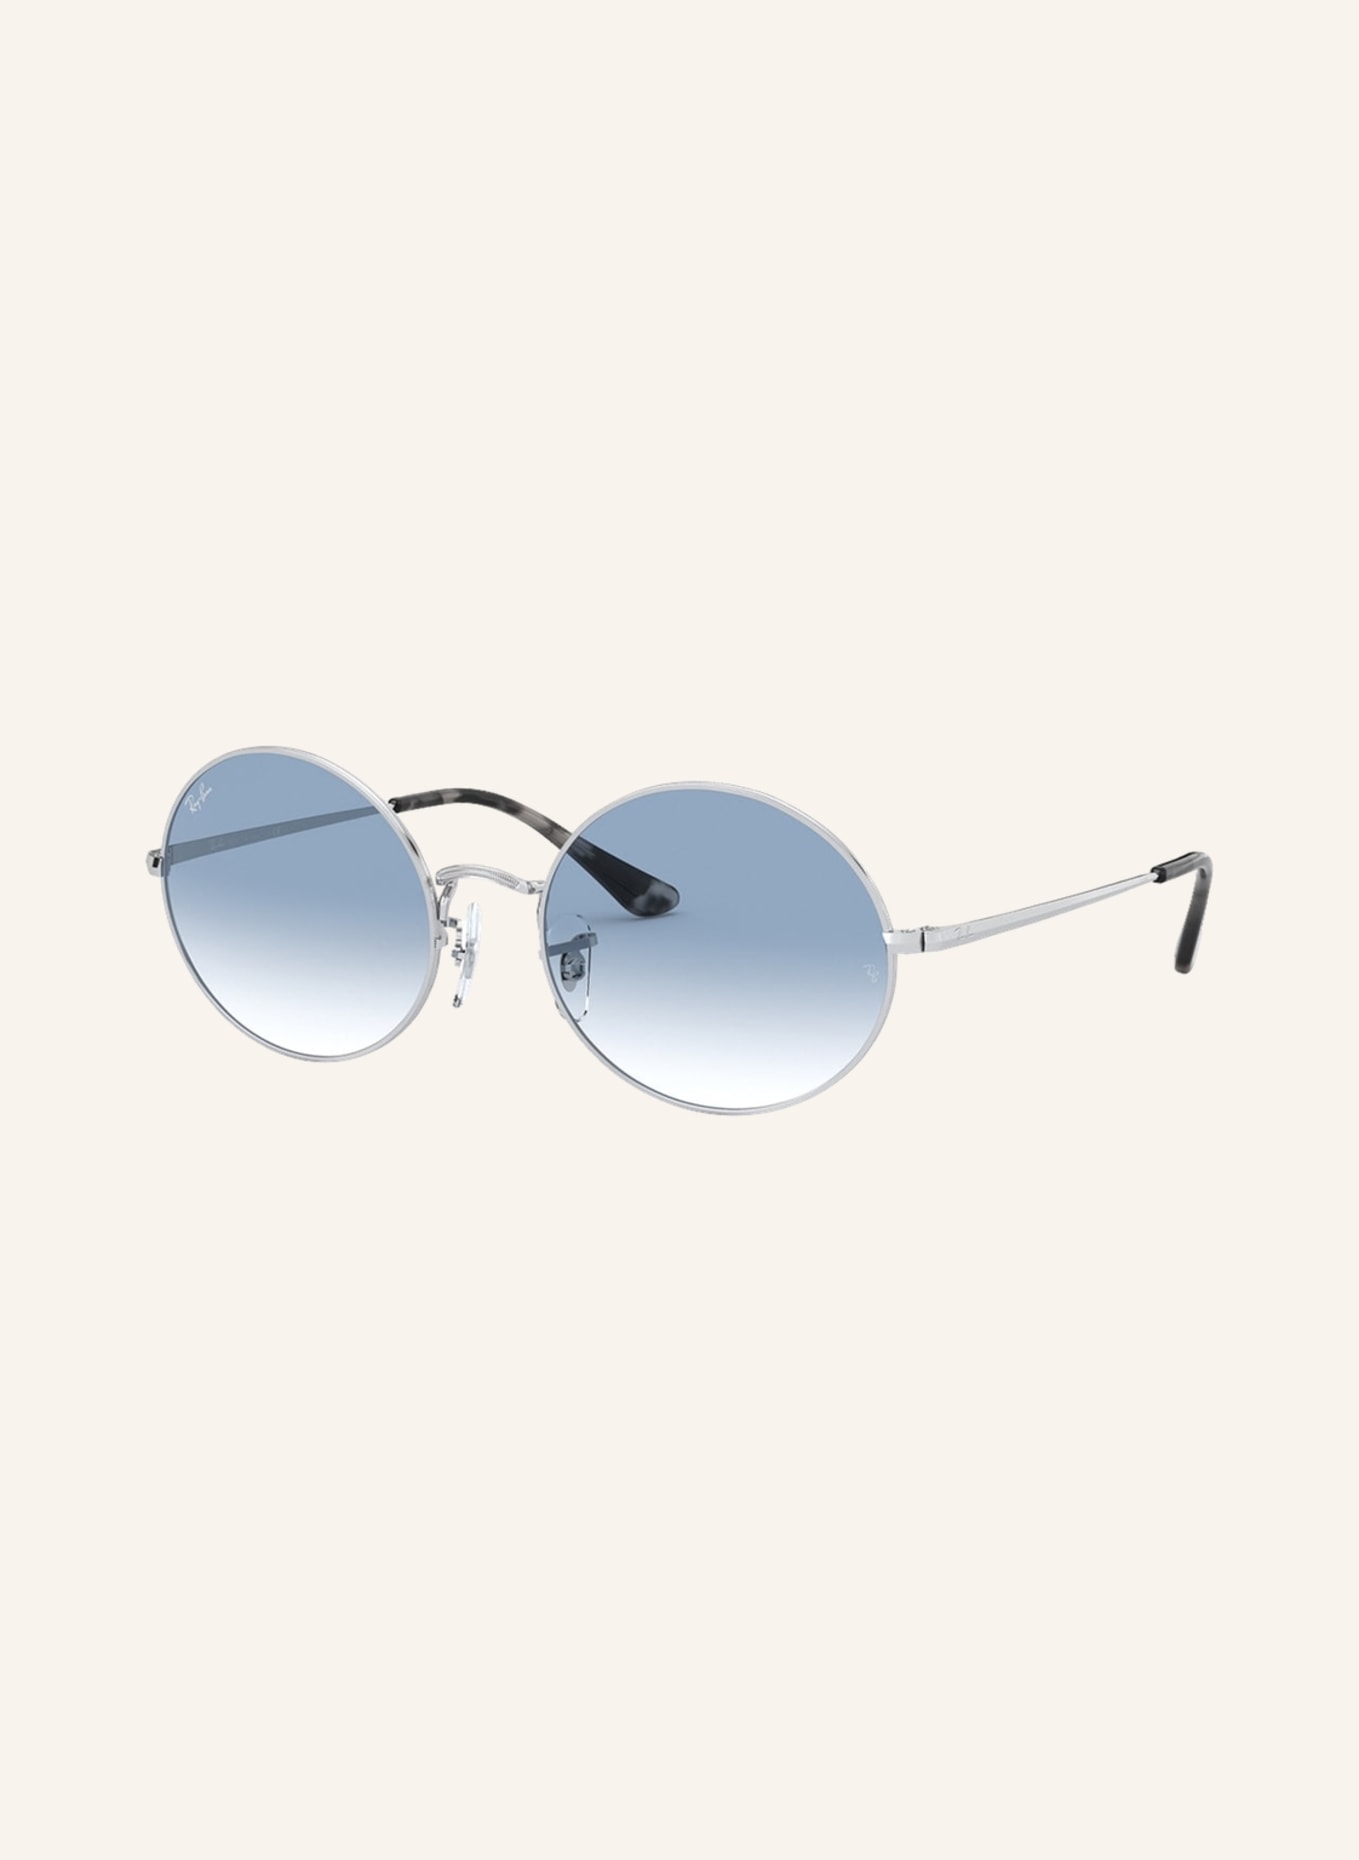 Ray-Ban Sunglasses RB 1970, Color: 91493 F - SILVER/ BLUE GRADIENT (Image 1)